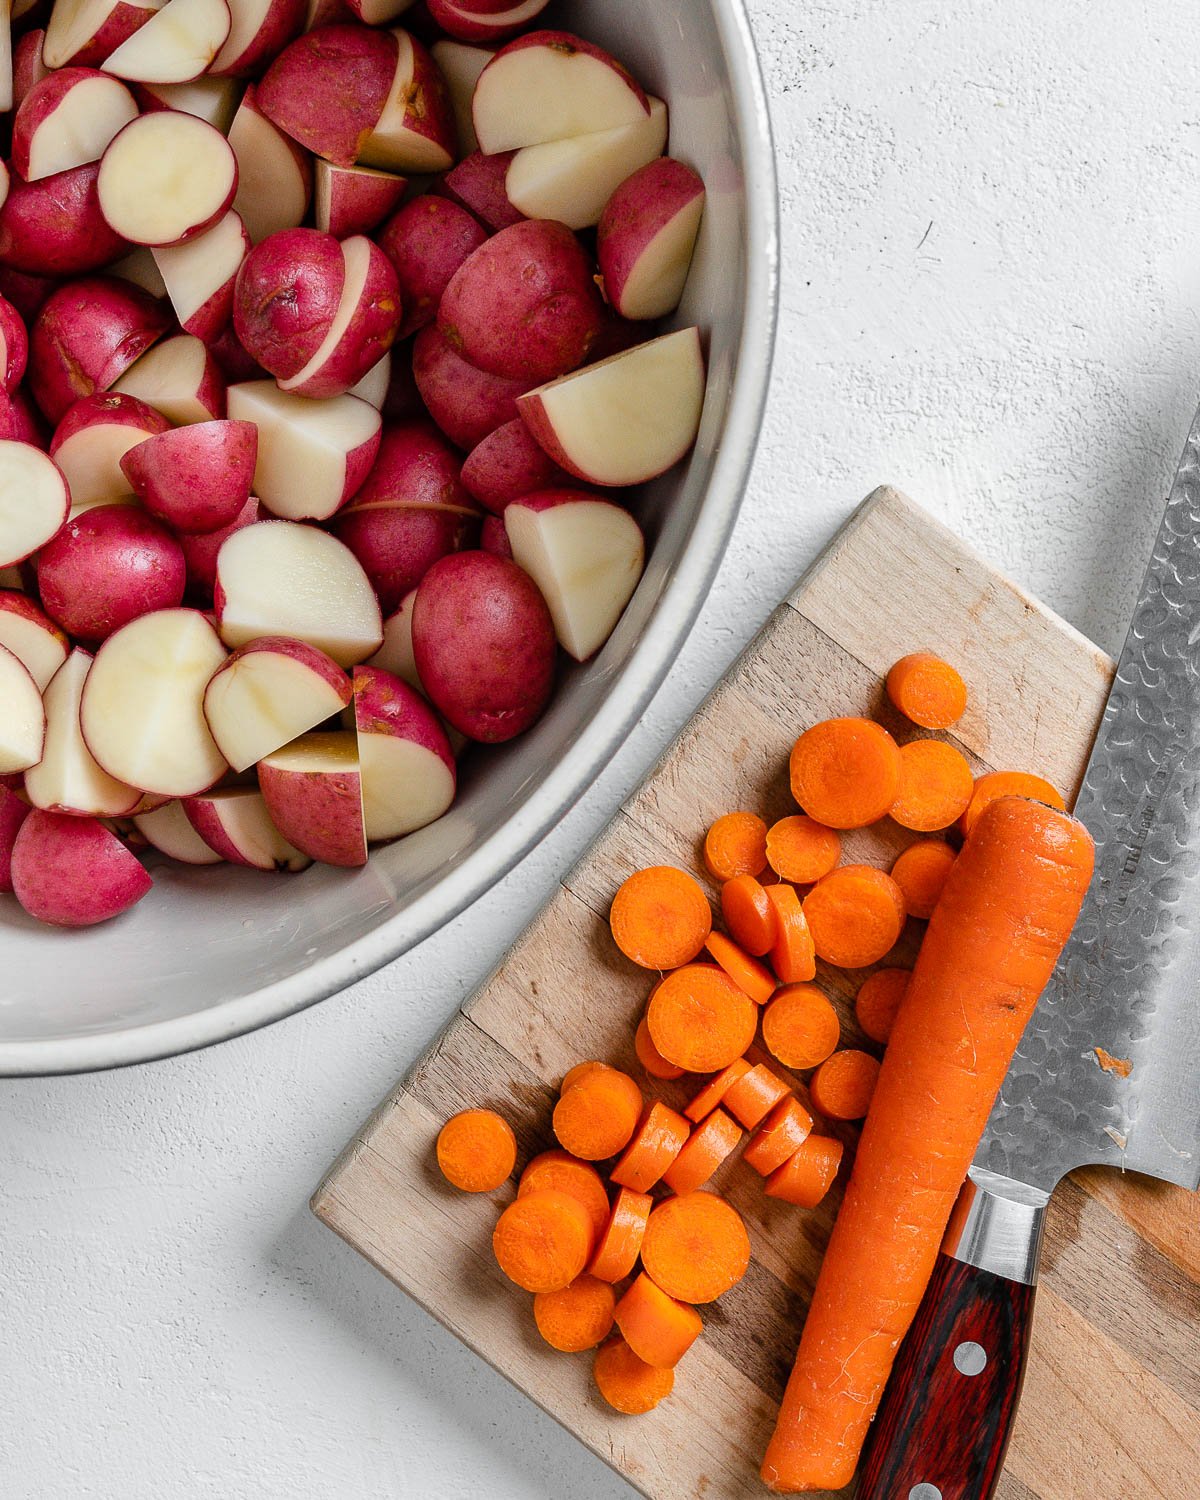 process of cutting carrots on a brown cutting board alongside bowl of potatoes